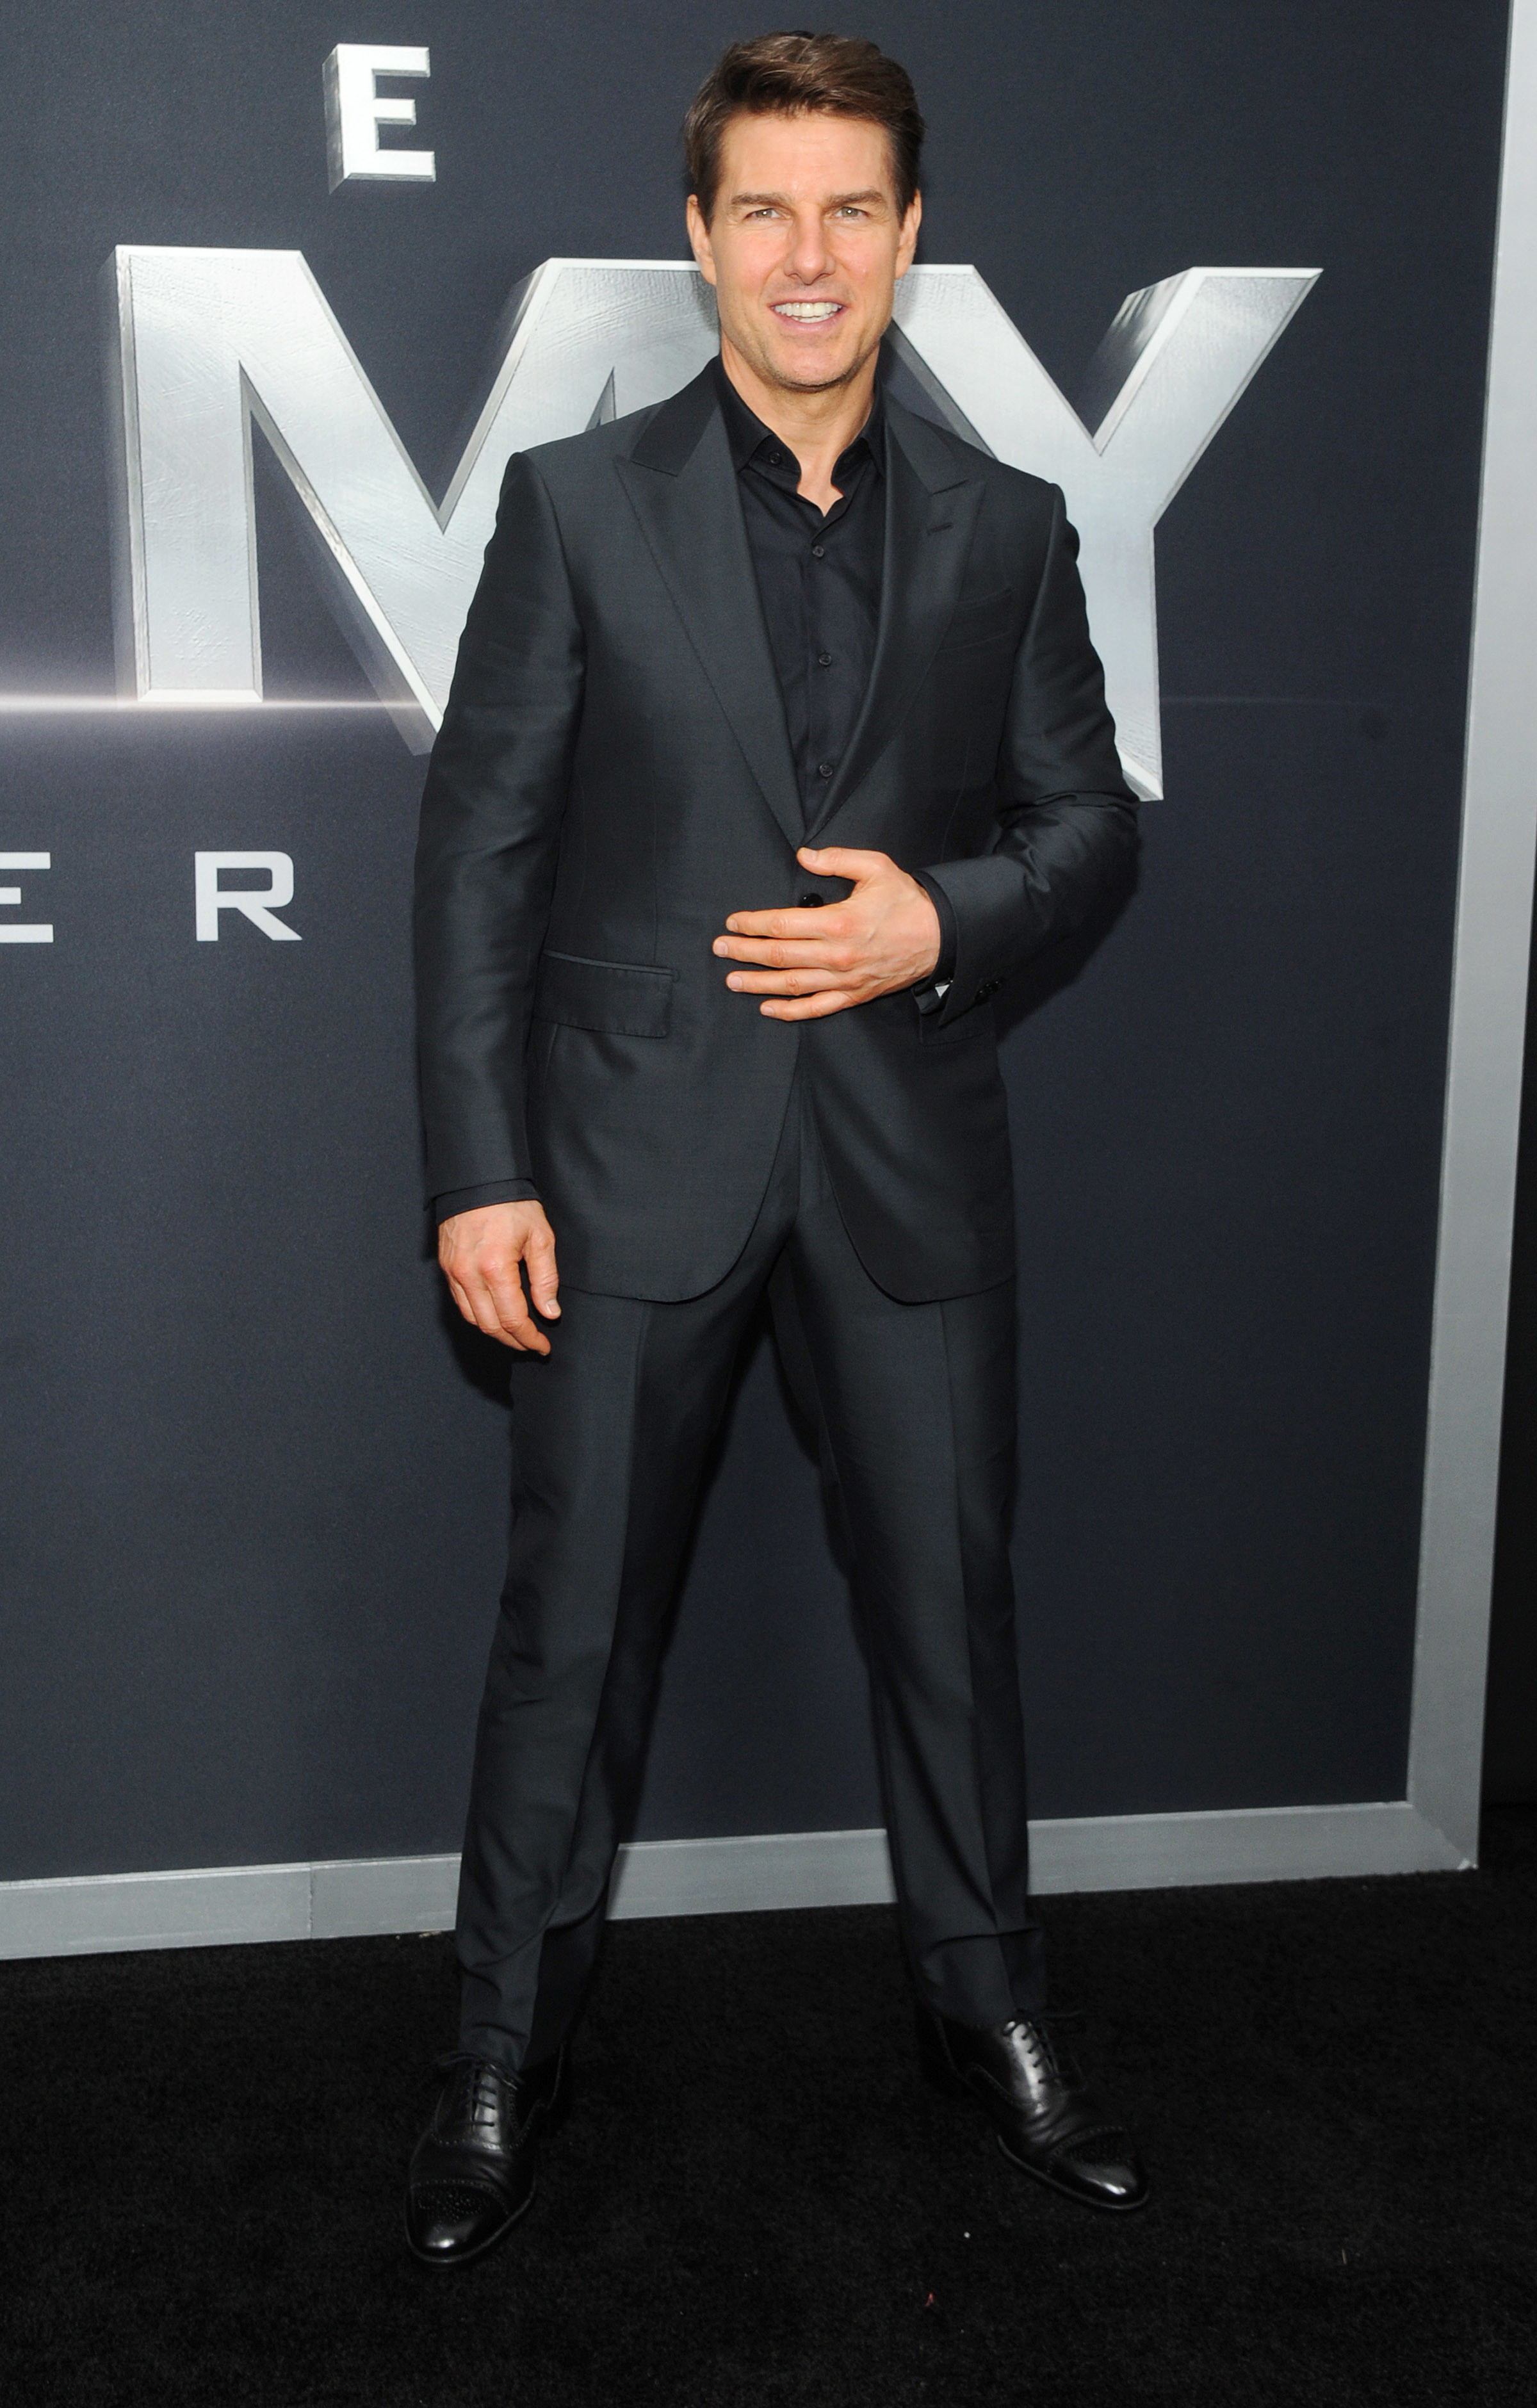 <p>Tom Cruise experienced a rare miss in 2017 when he starred in a reboot of "The Mummy." The adventure film was critically panned and a box office bomb, with reported losses of around $95 million. He's seen here at the movie's June 2017 premiere.</p>